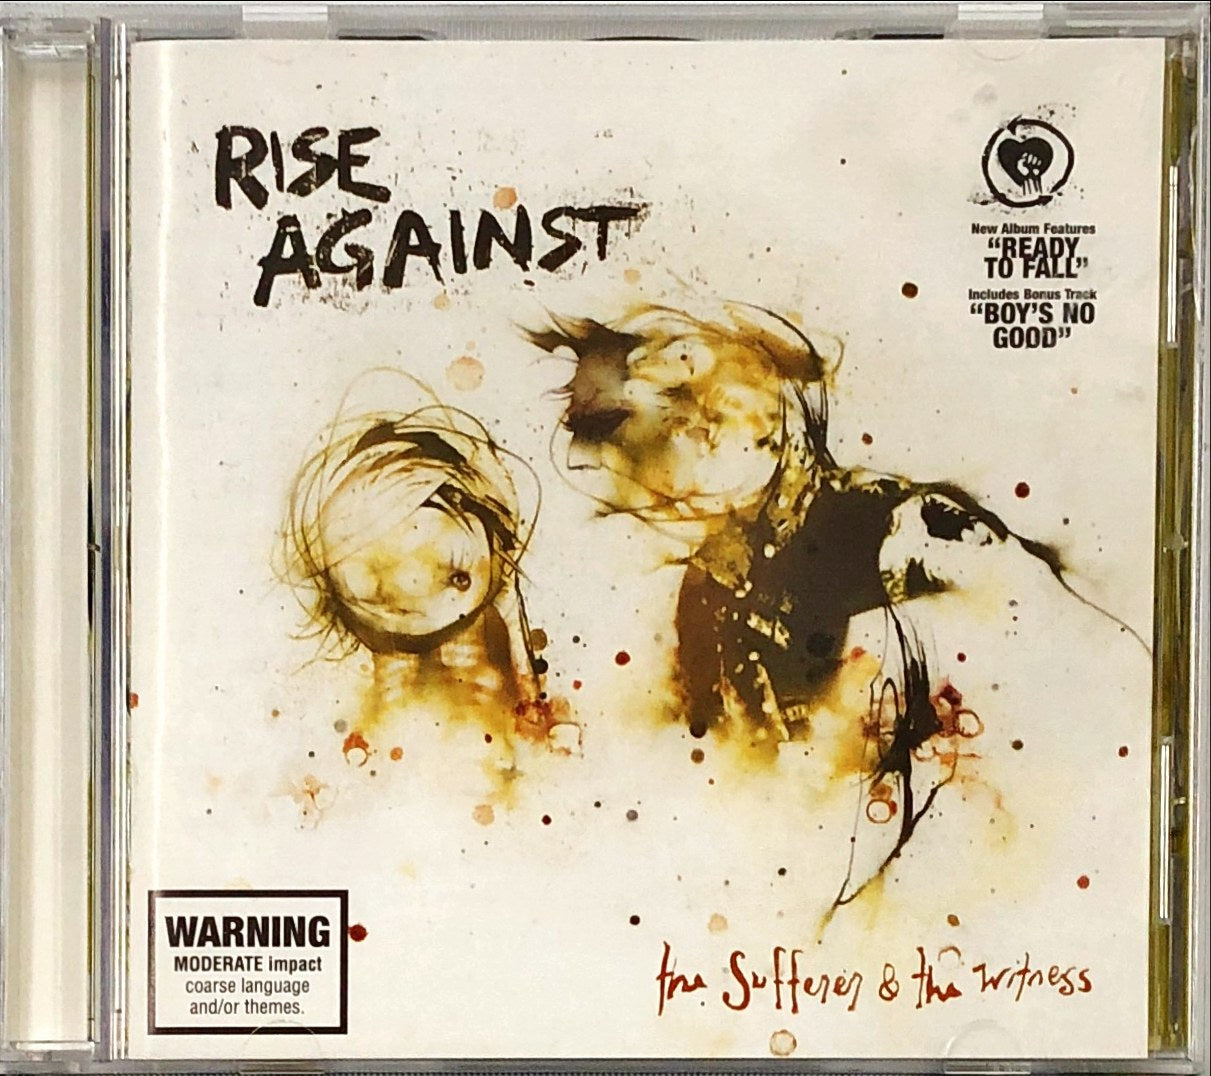 cover or album rise against the sufferer and the witness